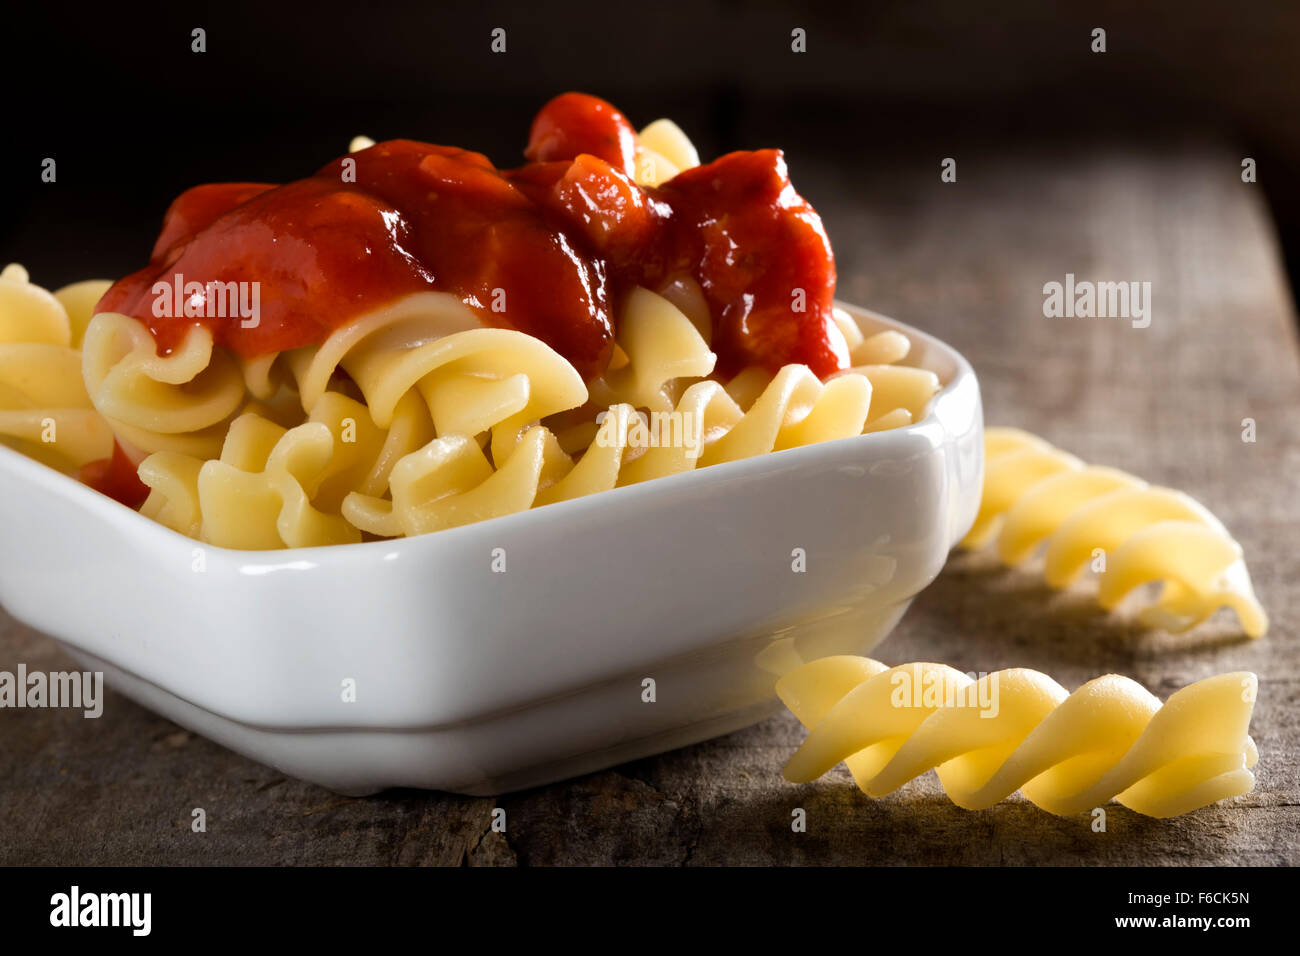 Boiled pasta and tomato sauce over wood background Stock Photo